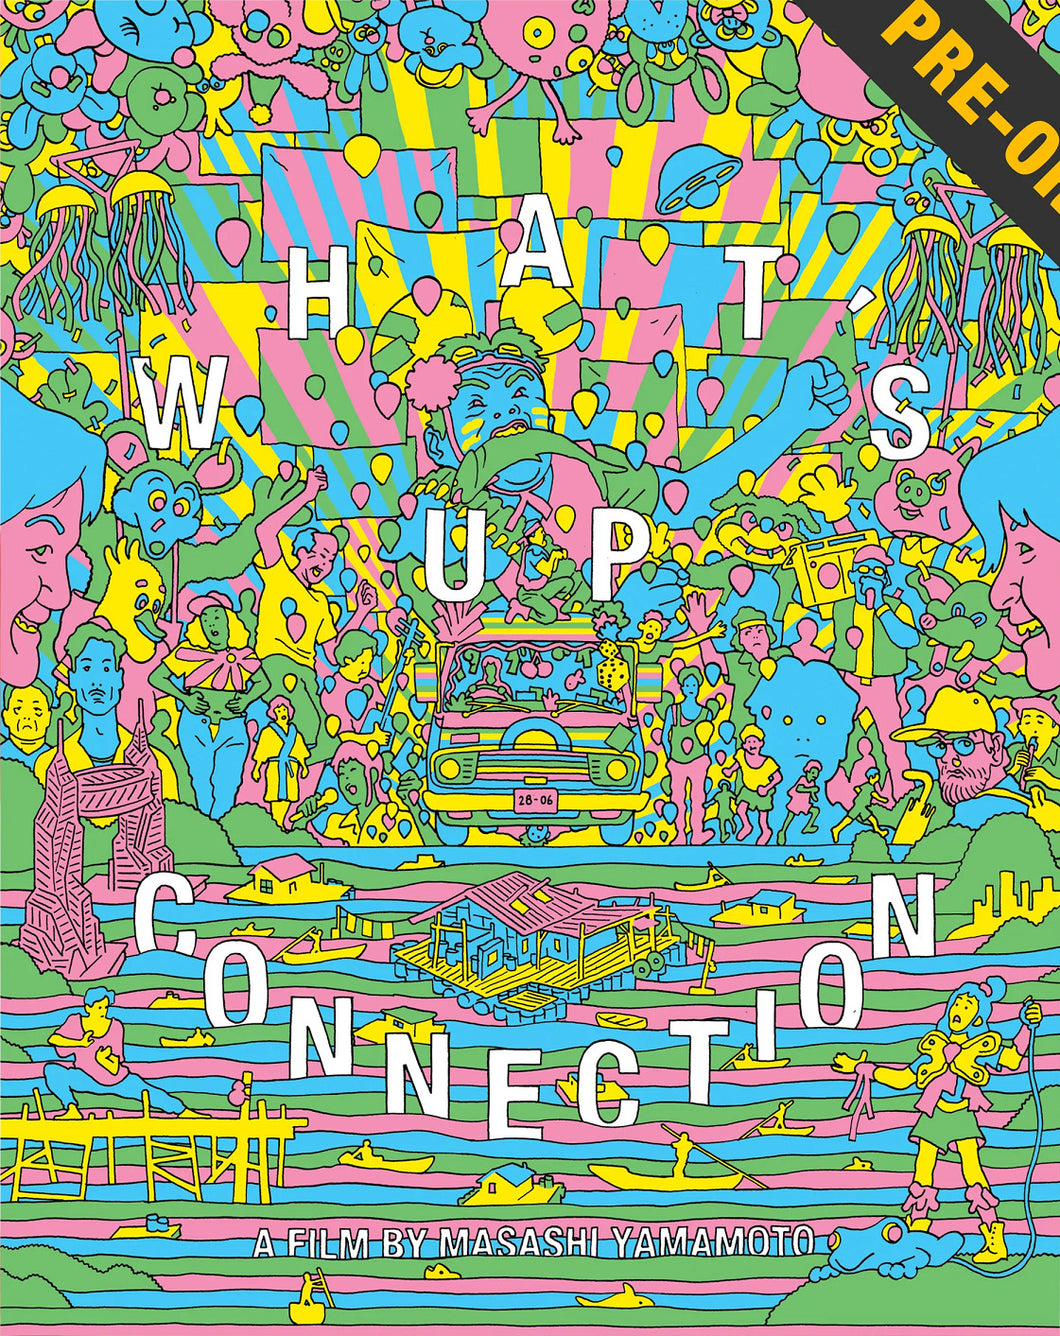 What's Up Connection (1990) de Masashi Yamamoto - front cover